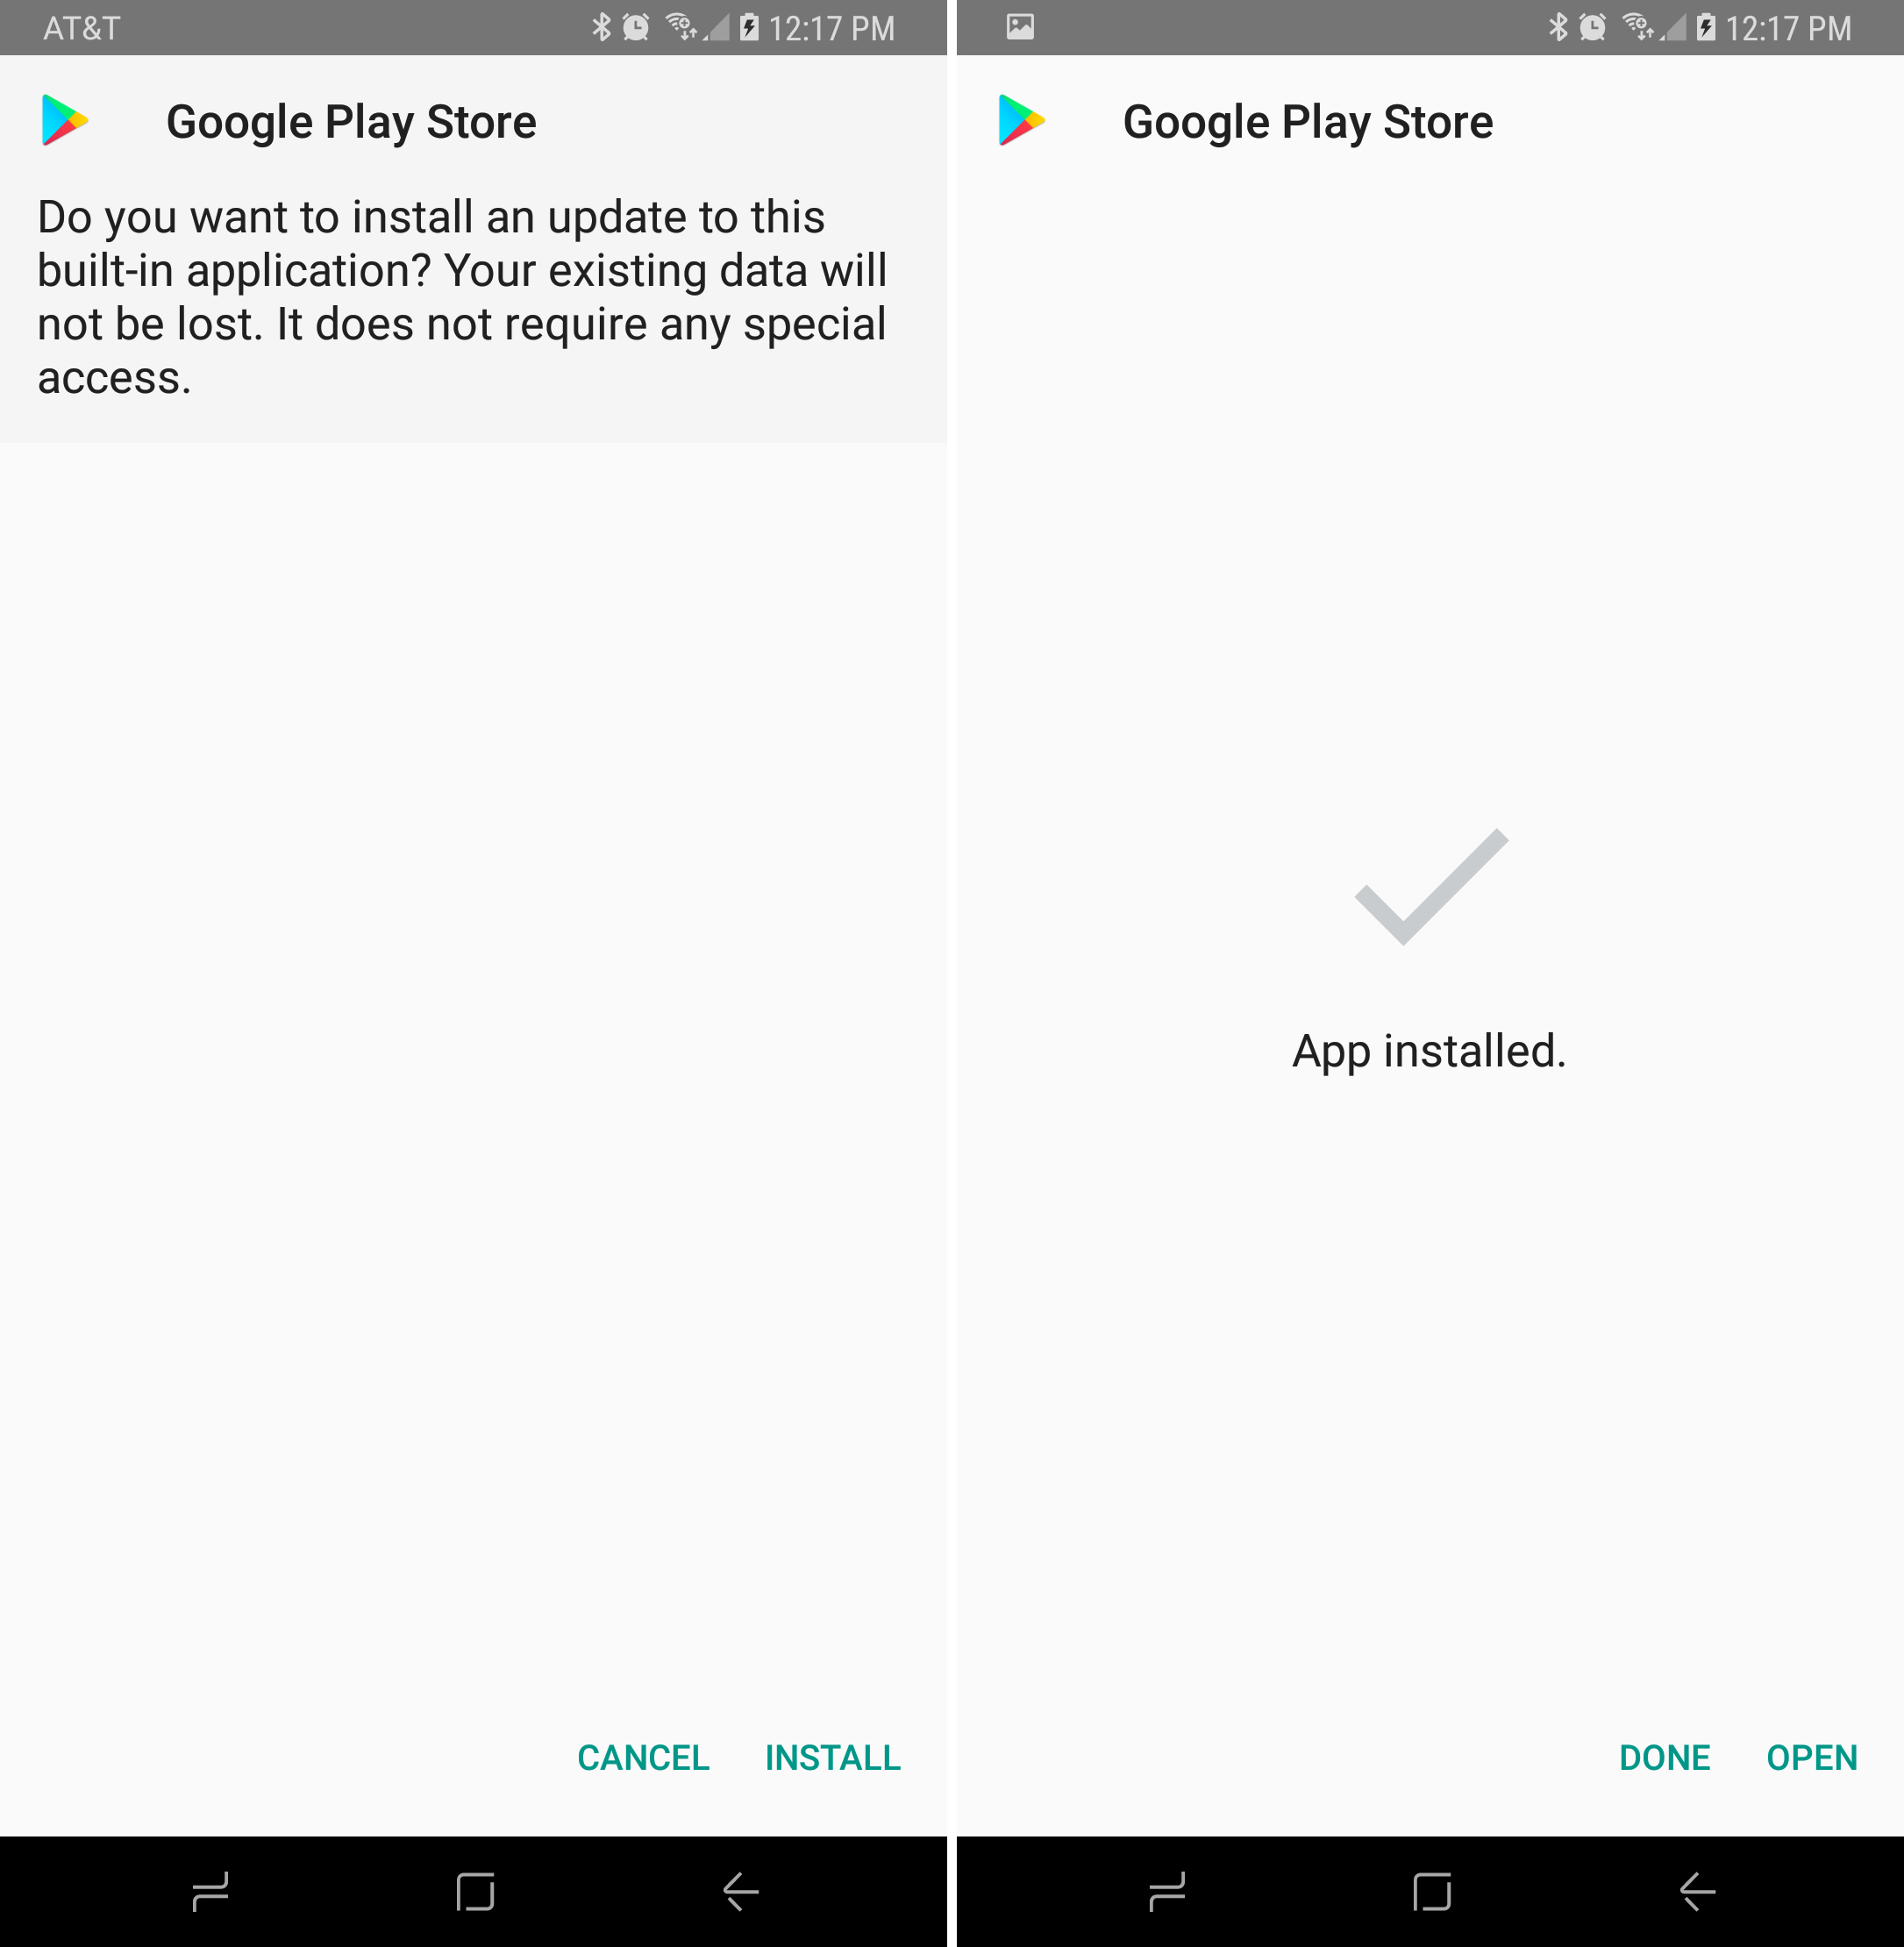 download apk file from play store manually installing